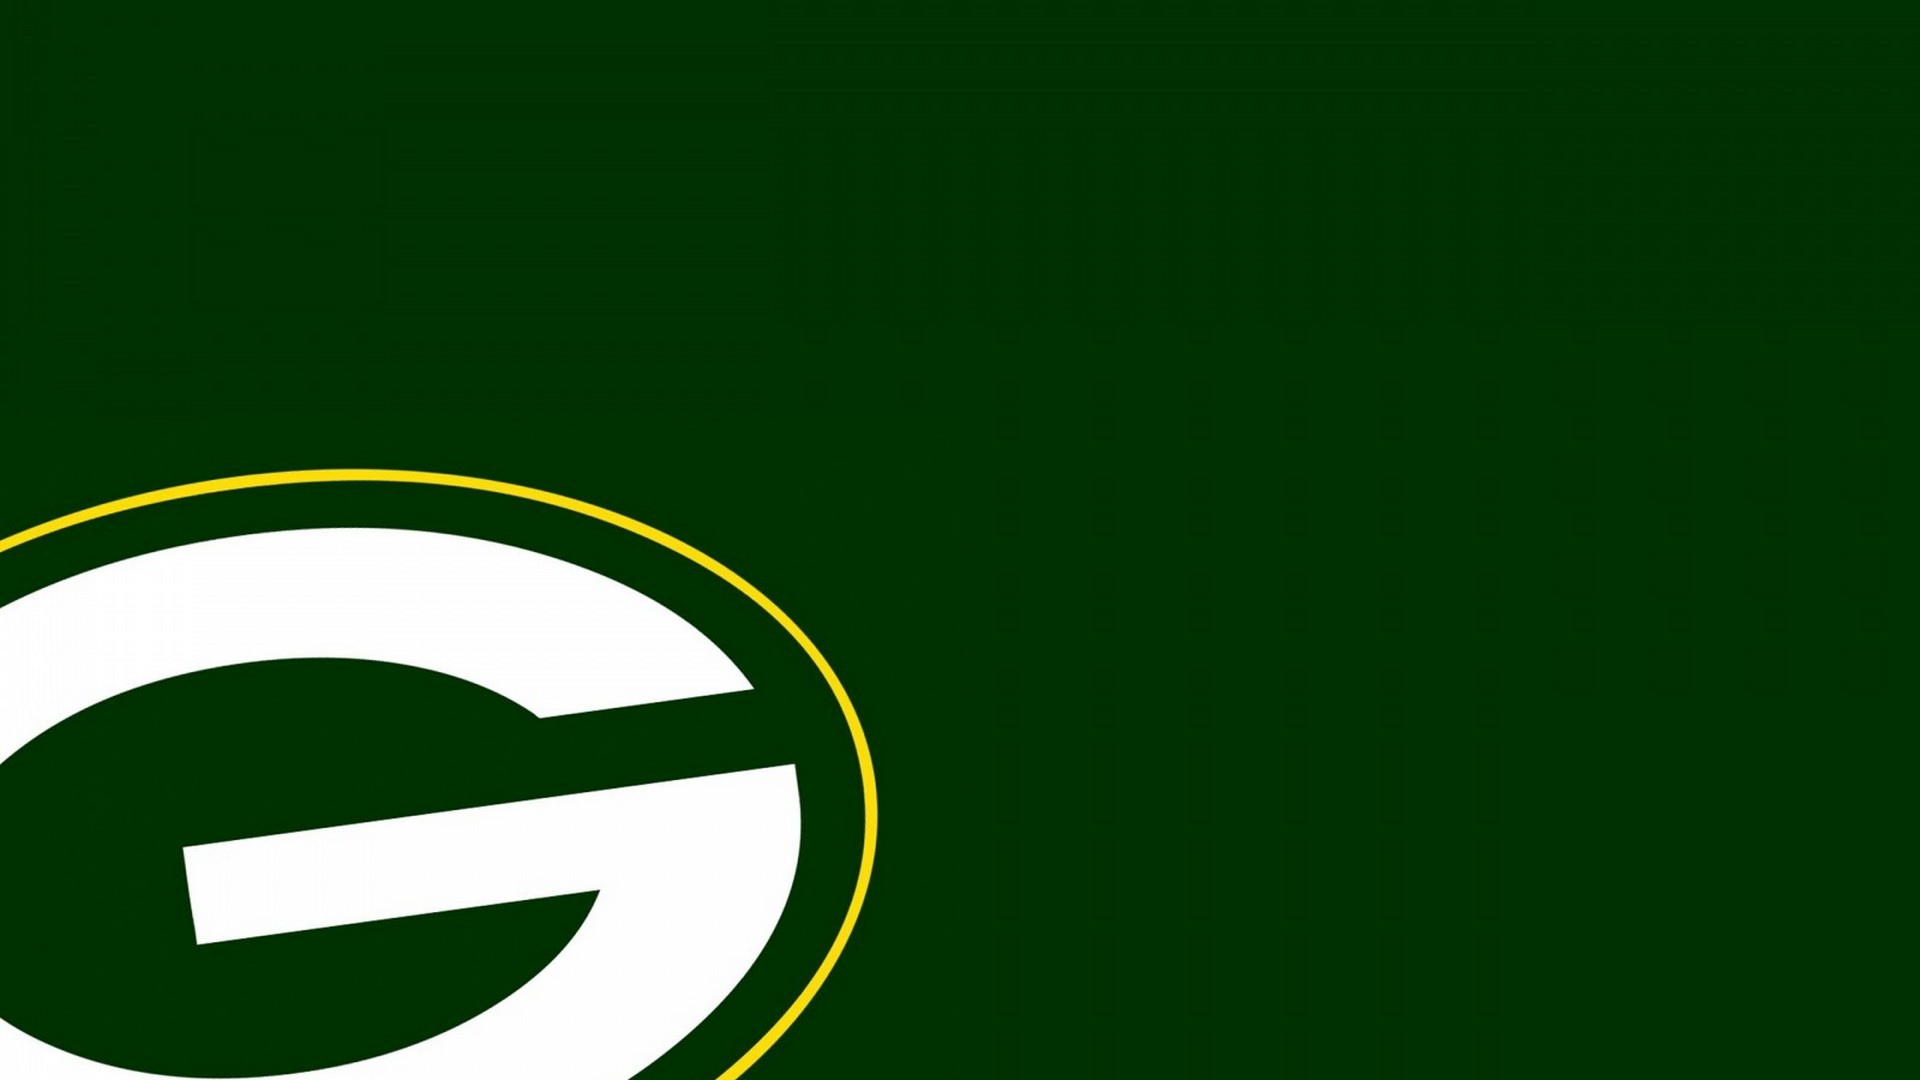 HD Backgrounds Green Bay Packers Logo With high-resolution 1920X1080 pixel. You can use this wallpaper for your Mac or Windows Desktop Background, iPhone, Android or Tablet and another Smartphone device